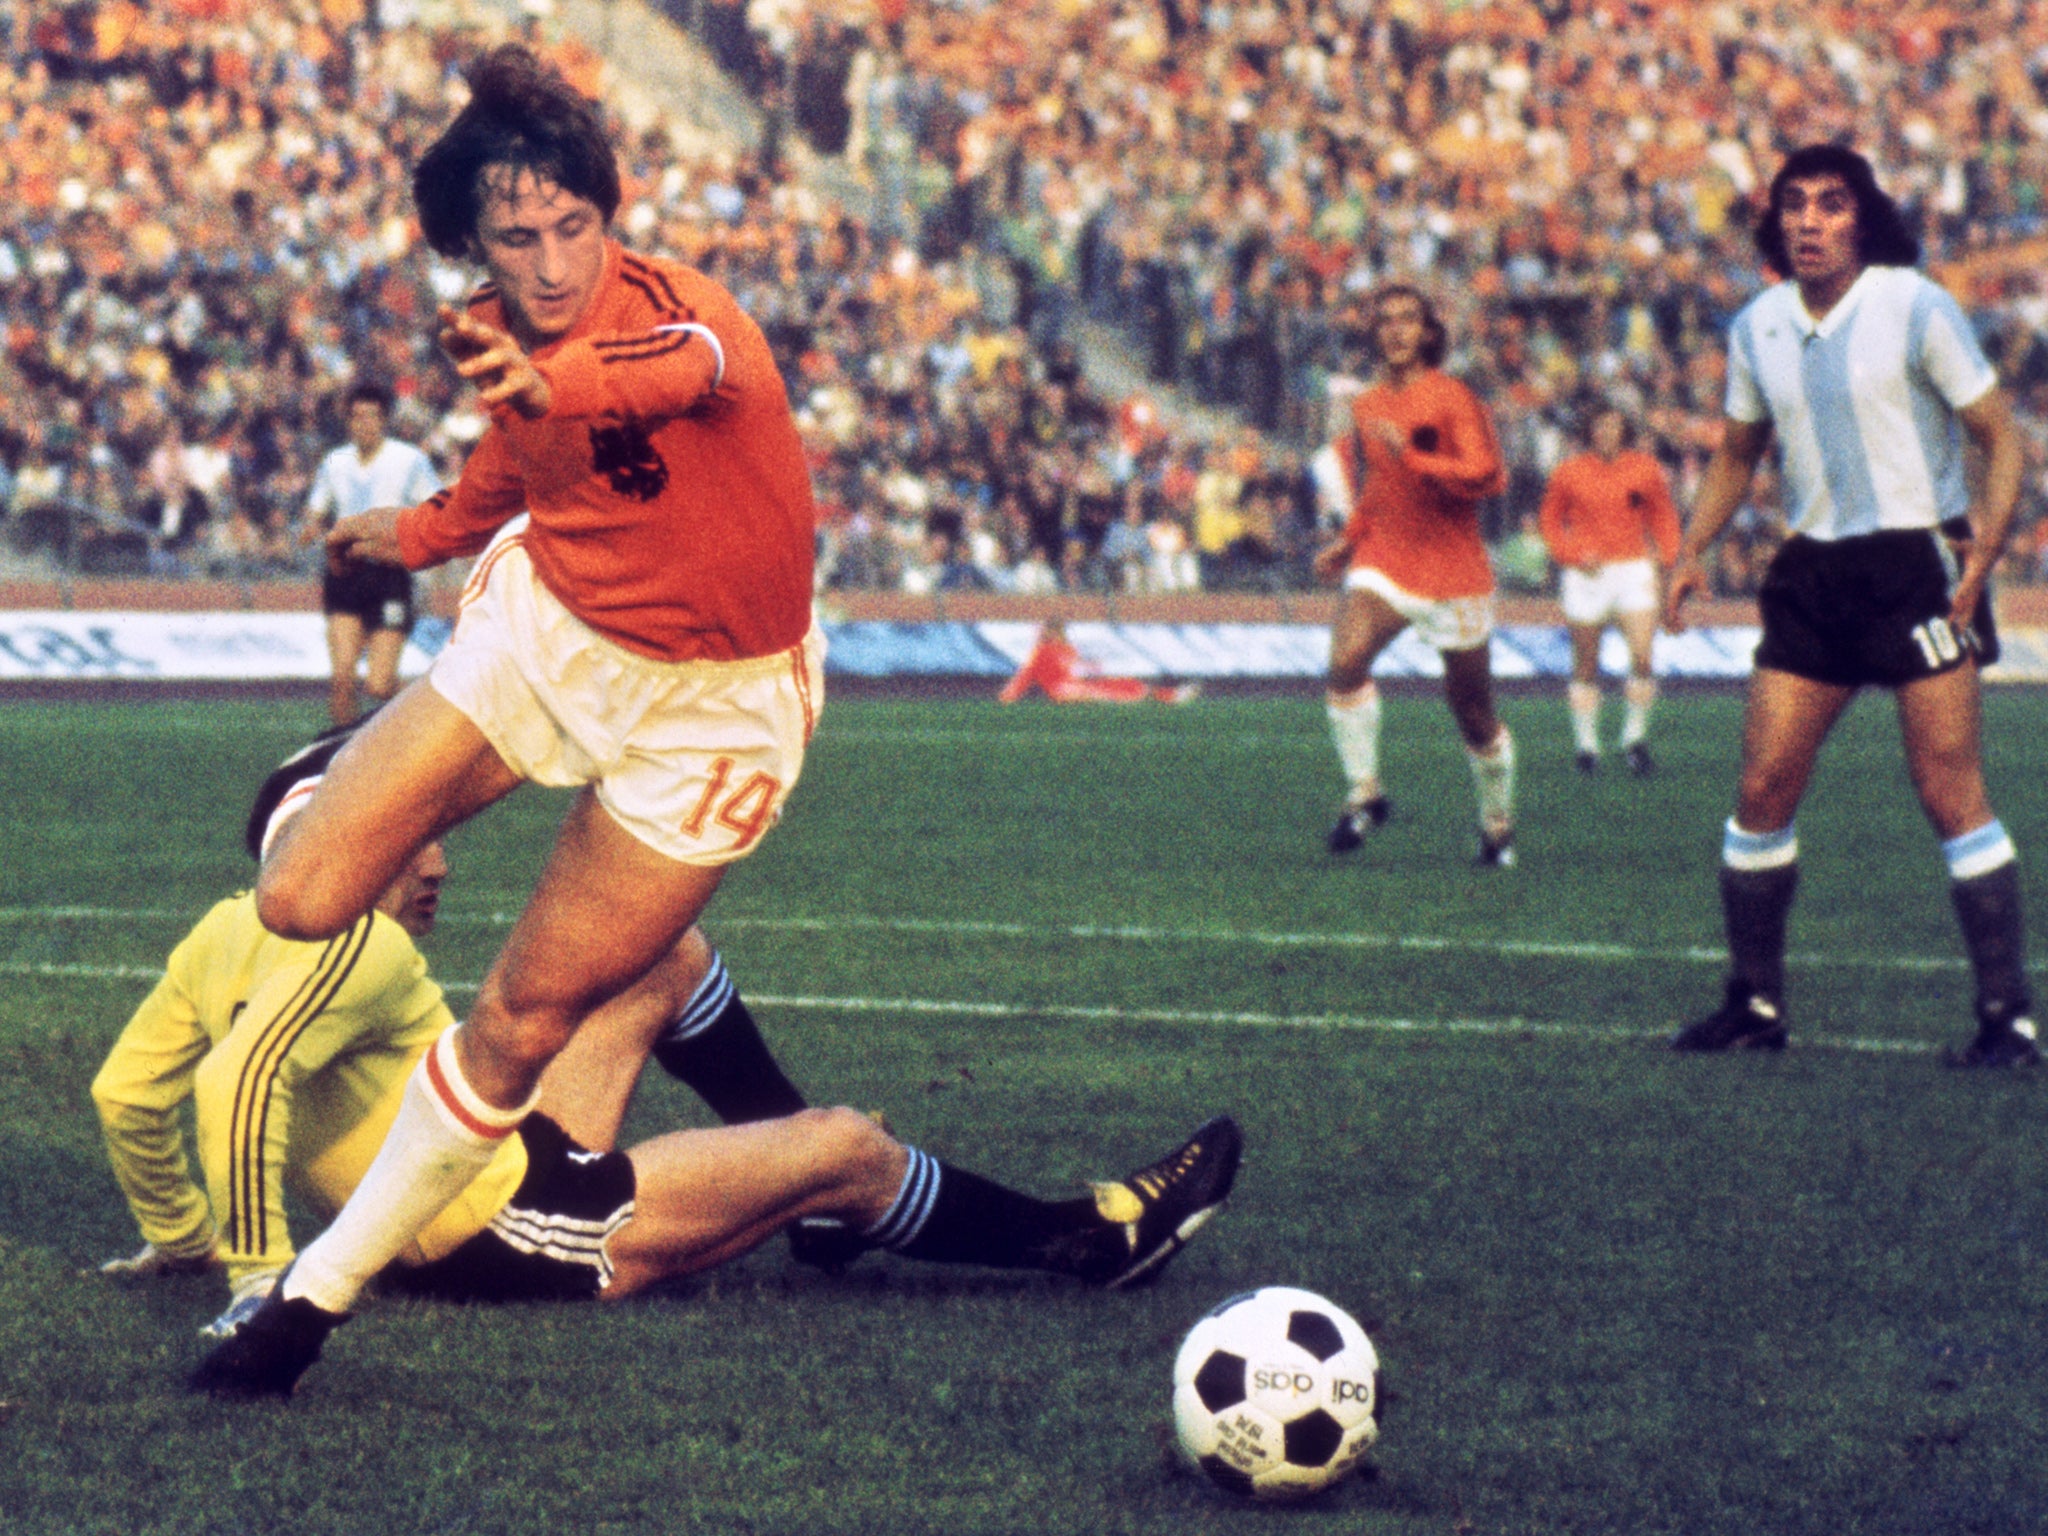 Johan Cruyff in action for the Netherlands during the 1974 World Cup